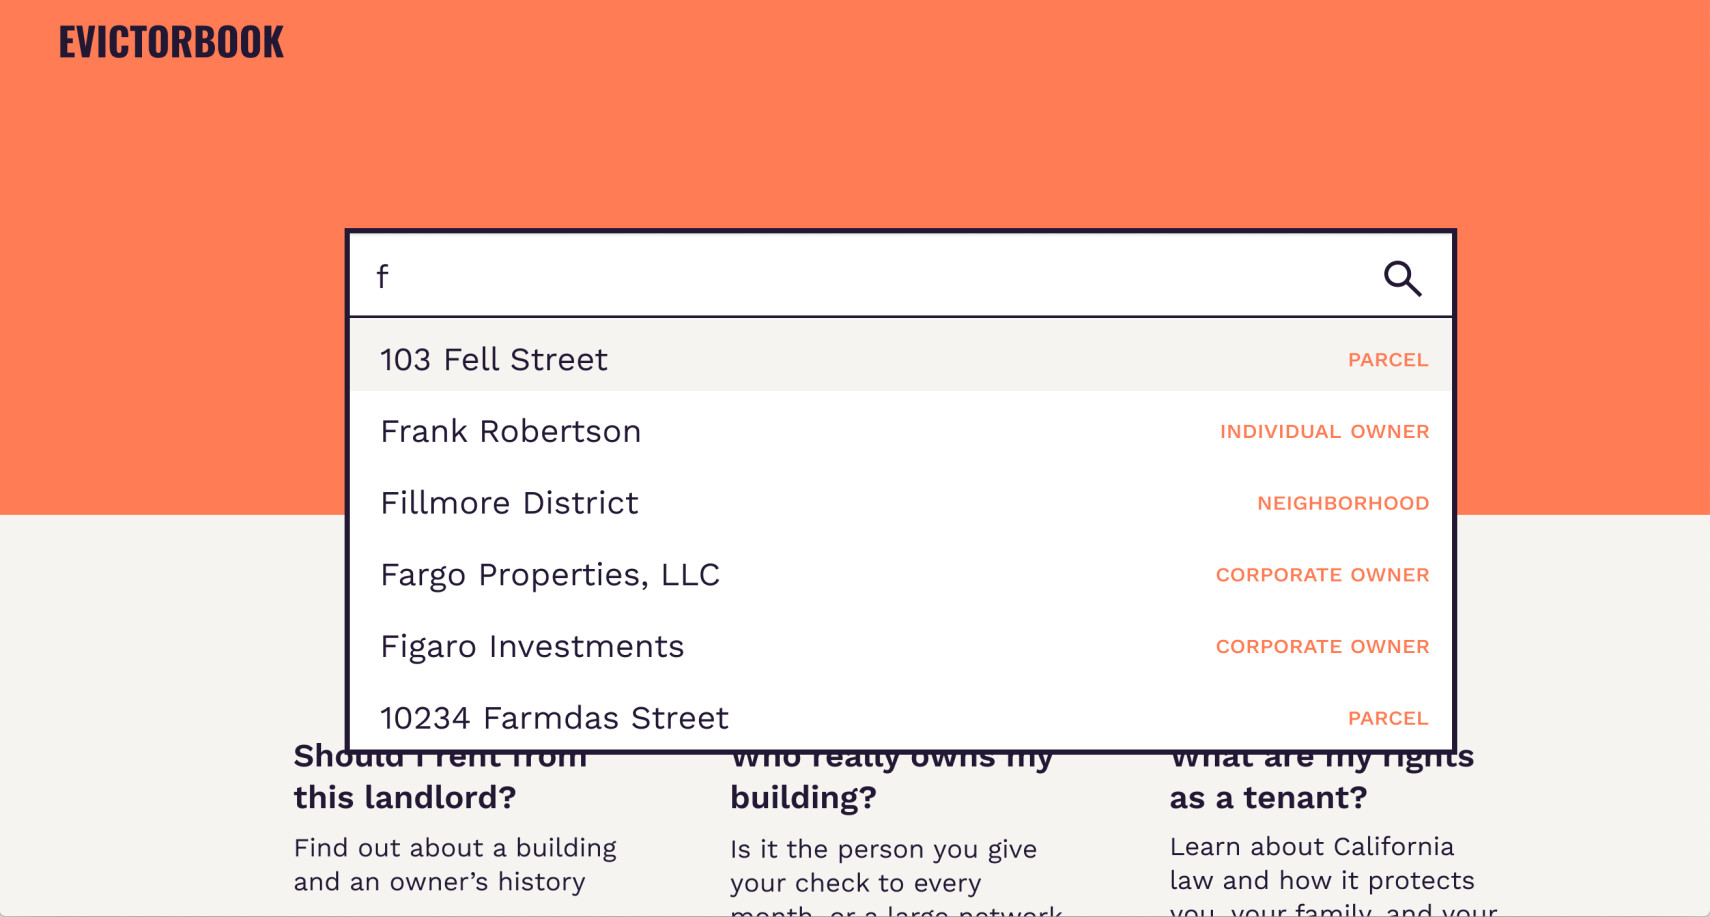 A mockup of Evictorbook showing a webpage with a search dropdown listing different properties in San Francisco